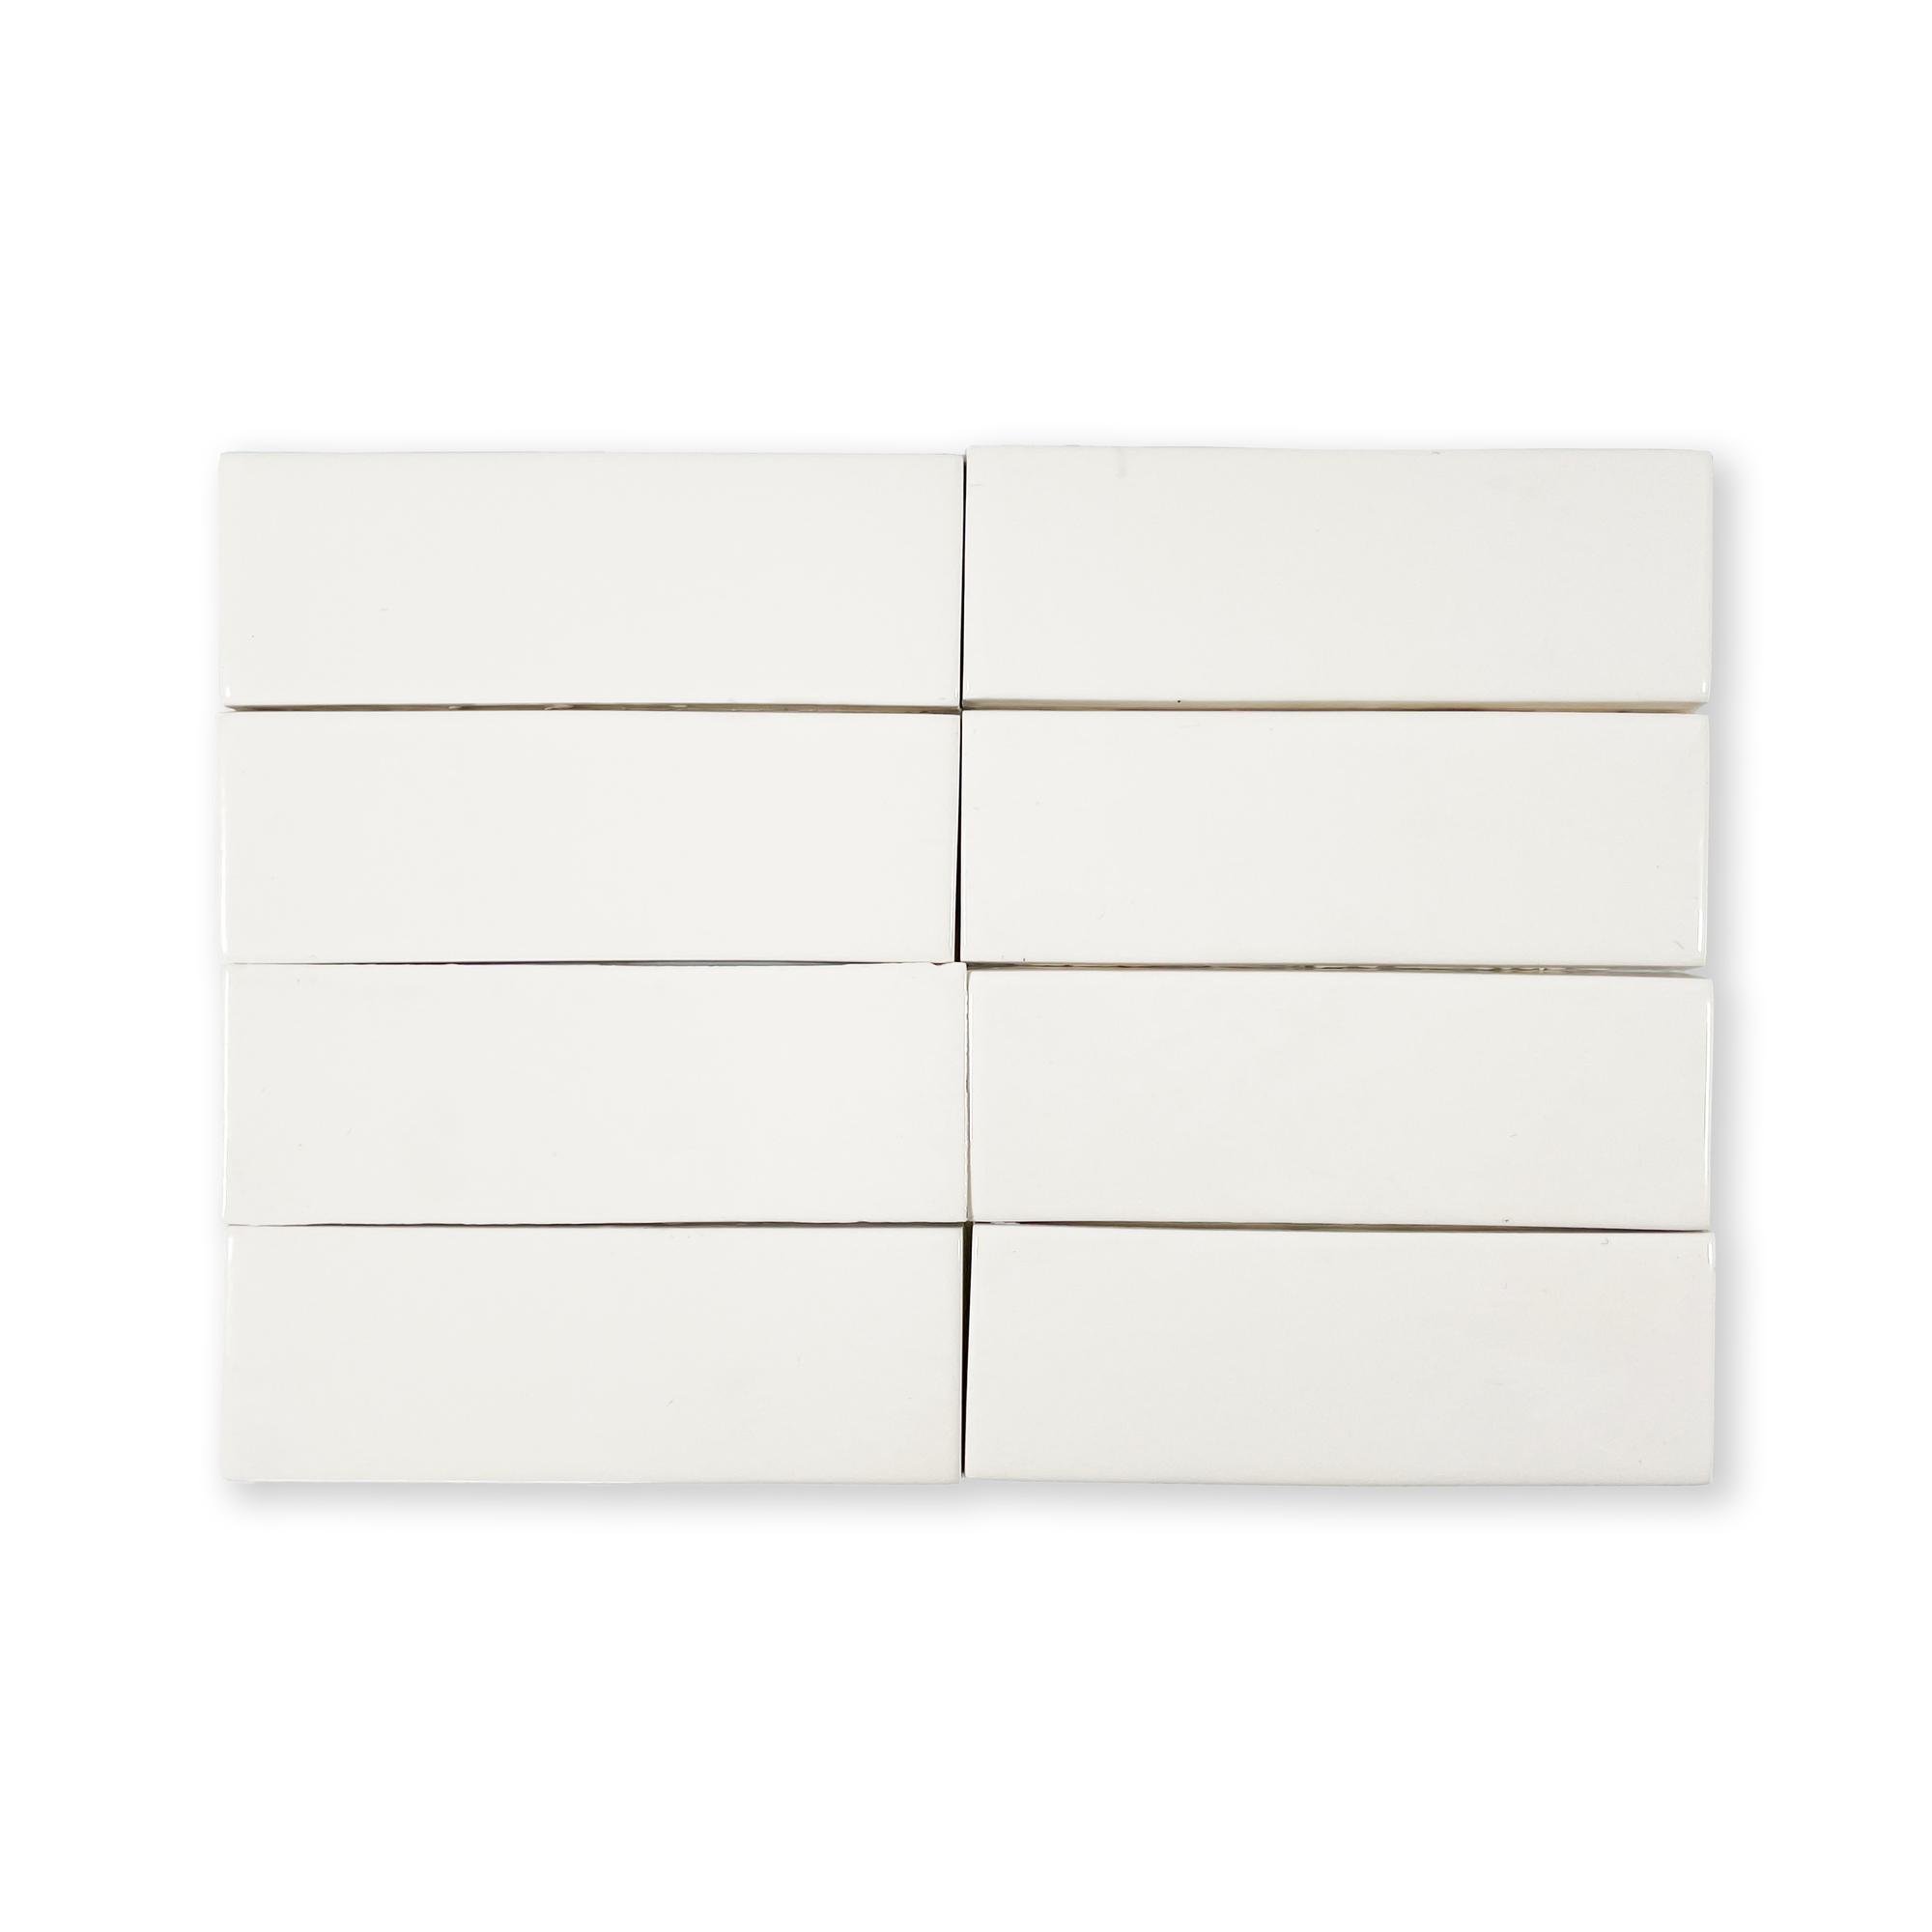 Extruded Handmade 2x6 Off White Glossy Subway Tile